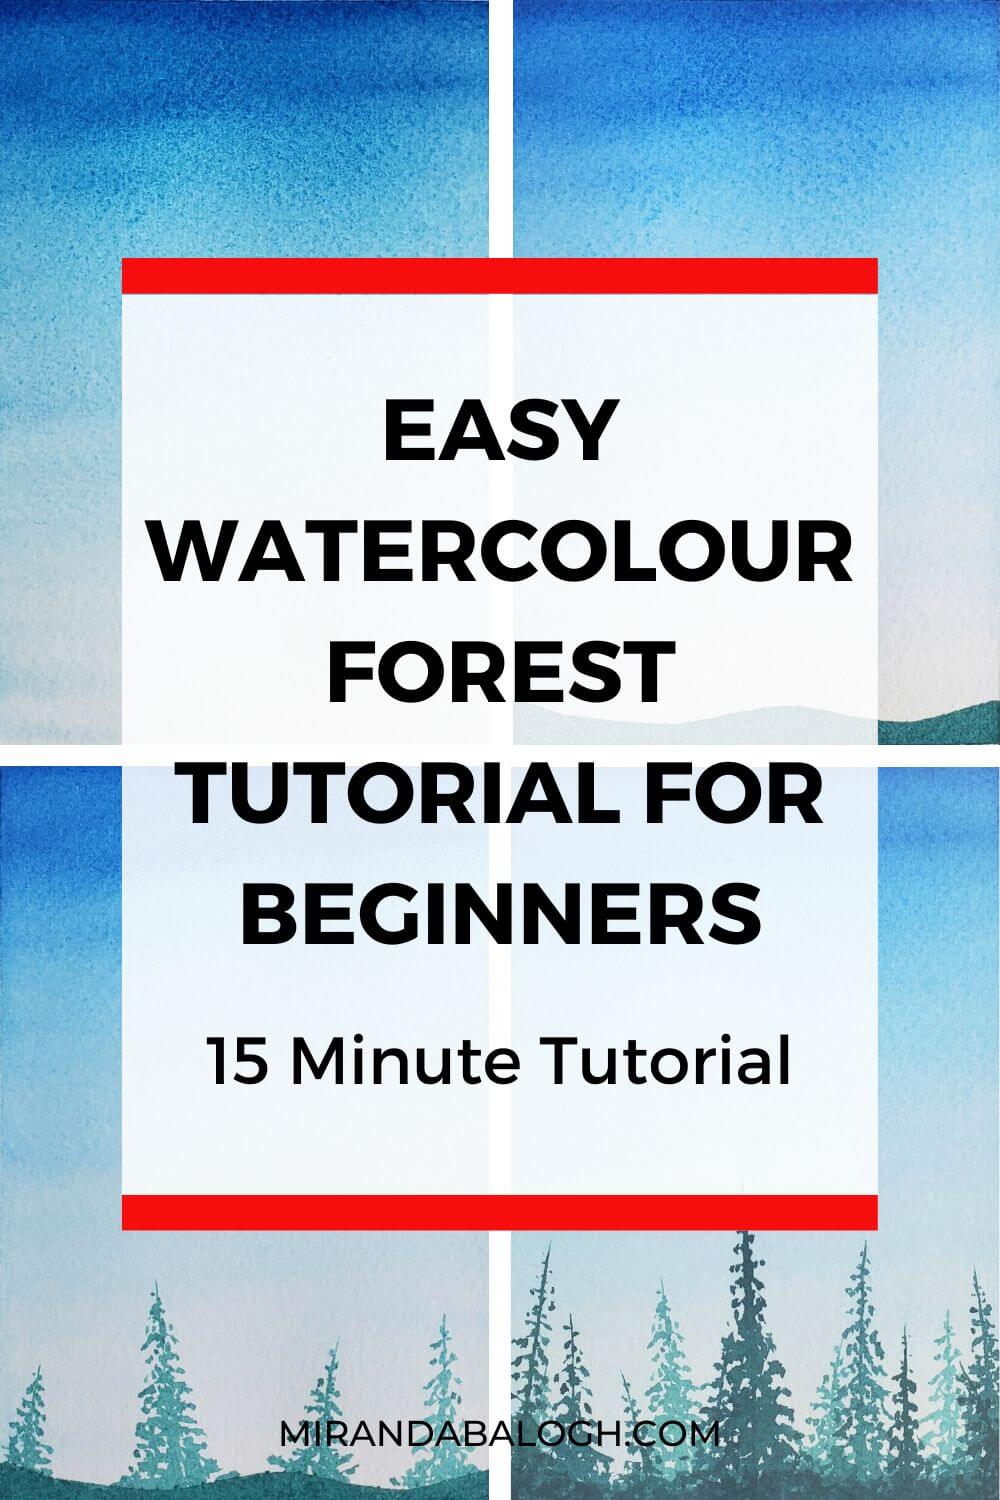 Learn how to paint an easy watercolour forest painting for beginners. In this step-by-step tutorial, you learn how to paint an easy watercolour forest with pine trees by using the wet-on-wet and wet-on-dry techniques. By the time you're done following along, you'll have the confidence to create this simple watercolour painting in only 15 minutes!